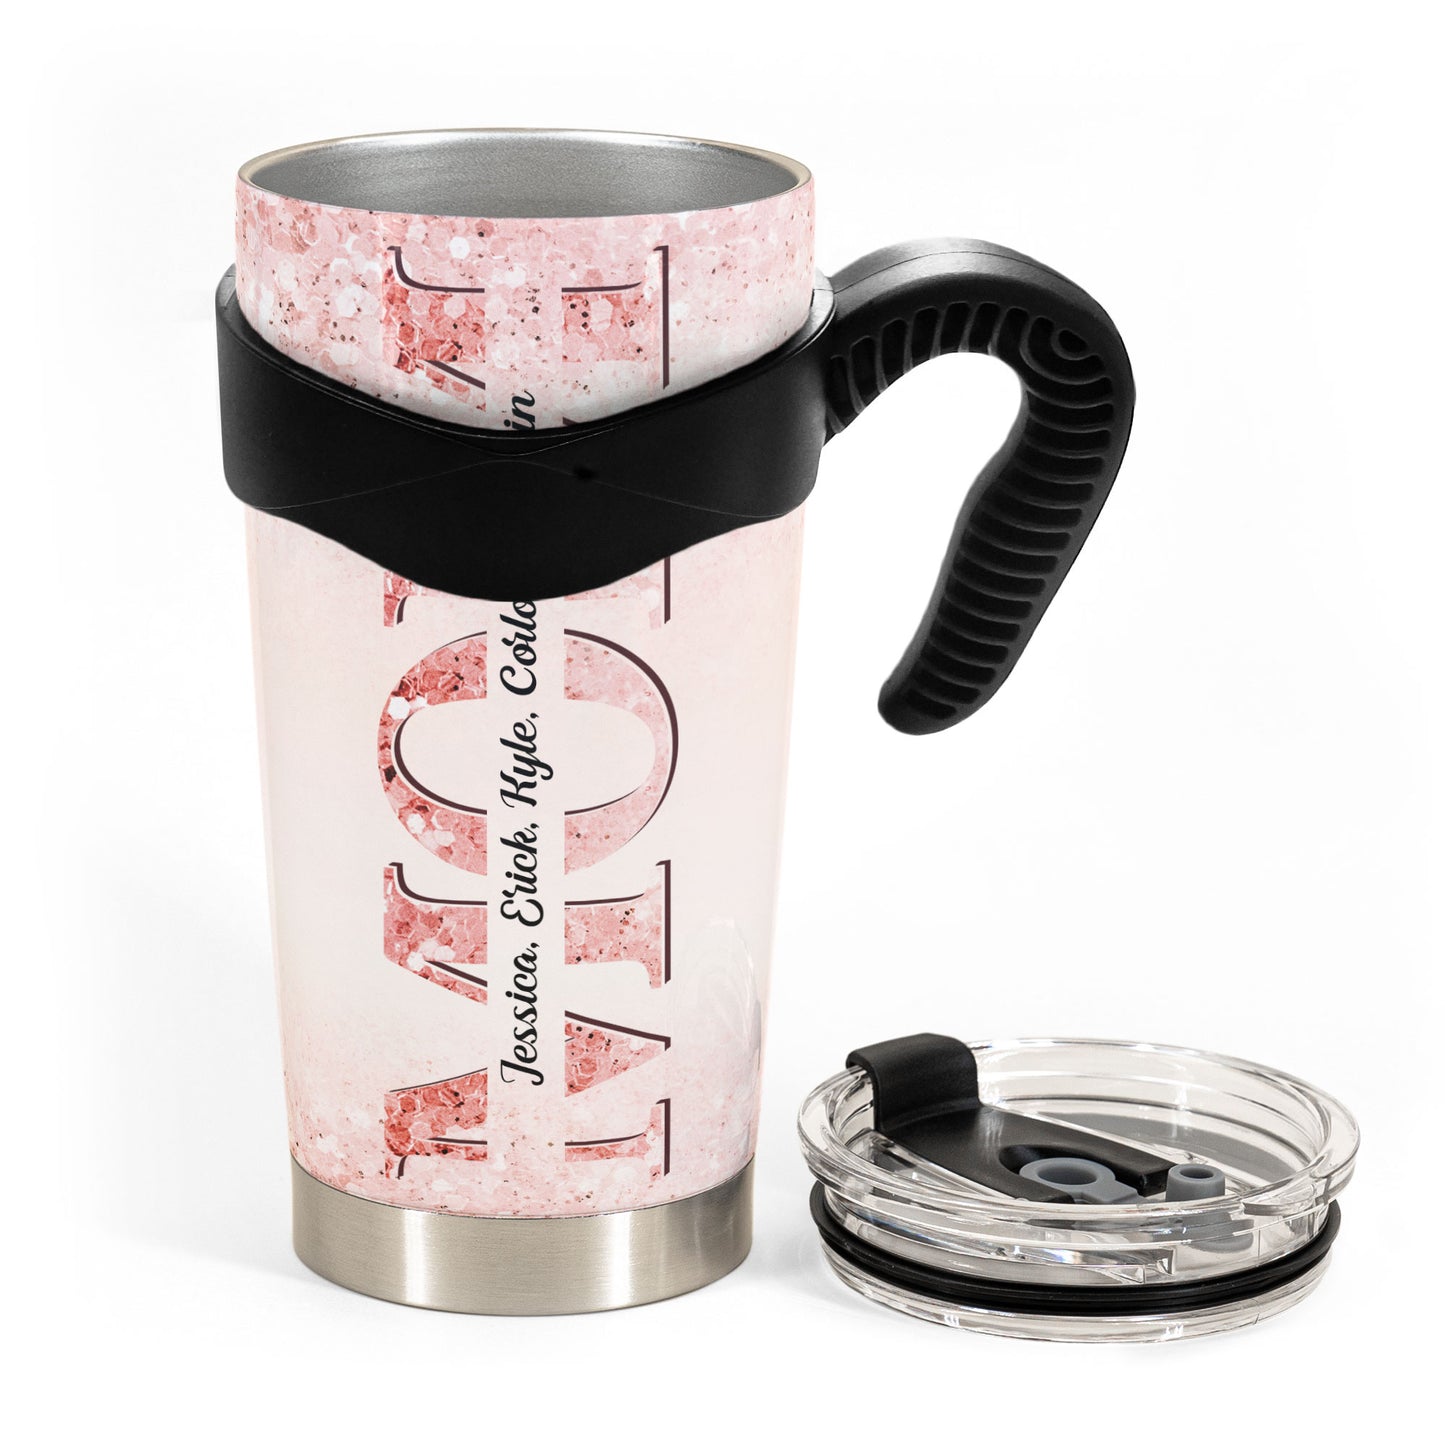 Photo Tumbler Gift For Mom - Personalized Photo Tumbler Cup